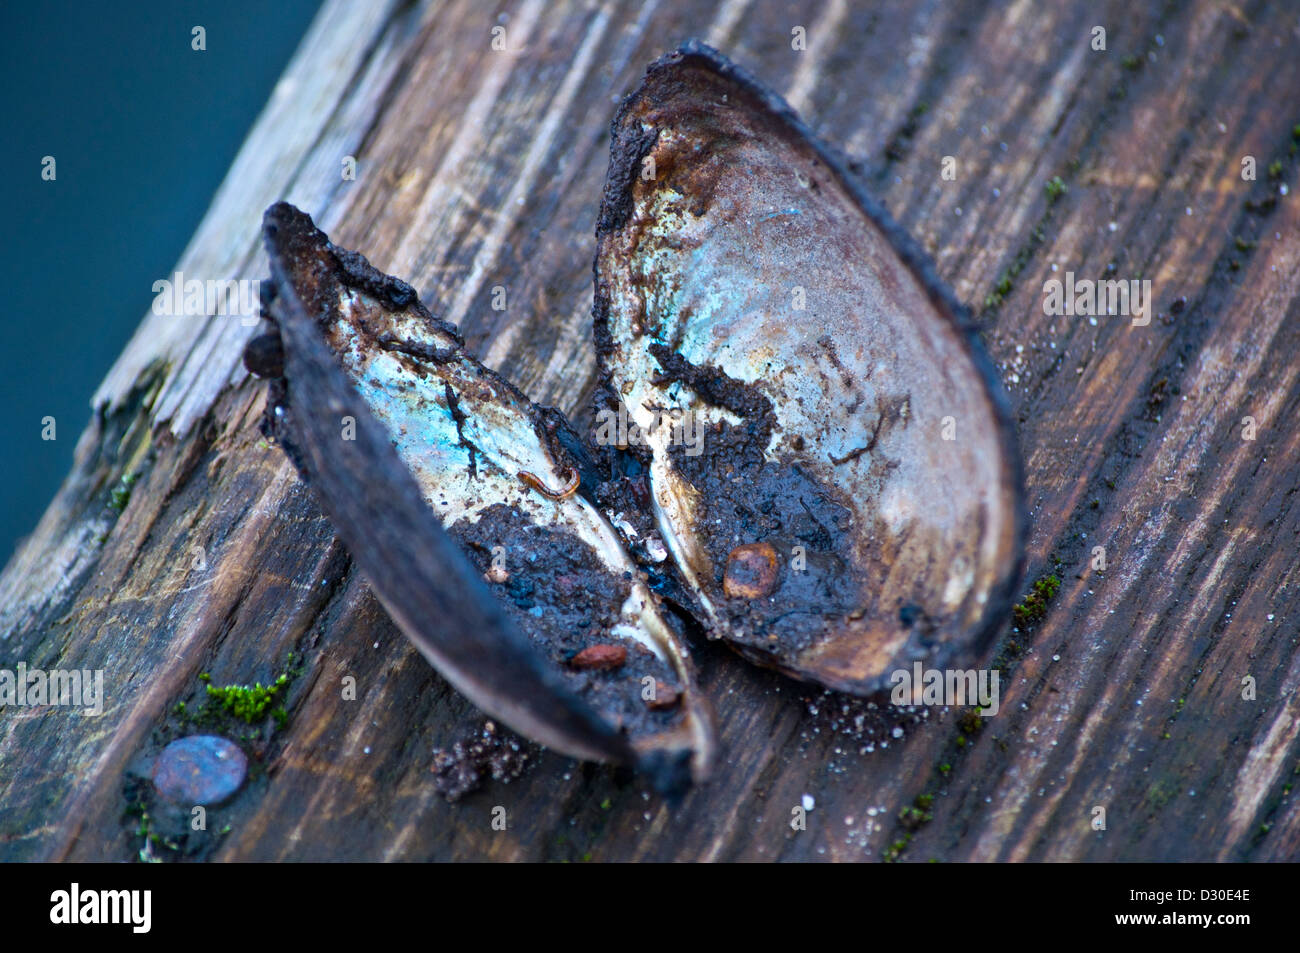 Open shell on fresh water mussel Stock Photo